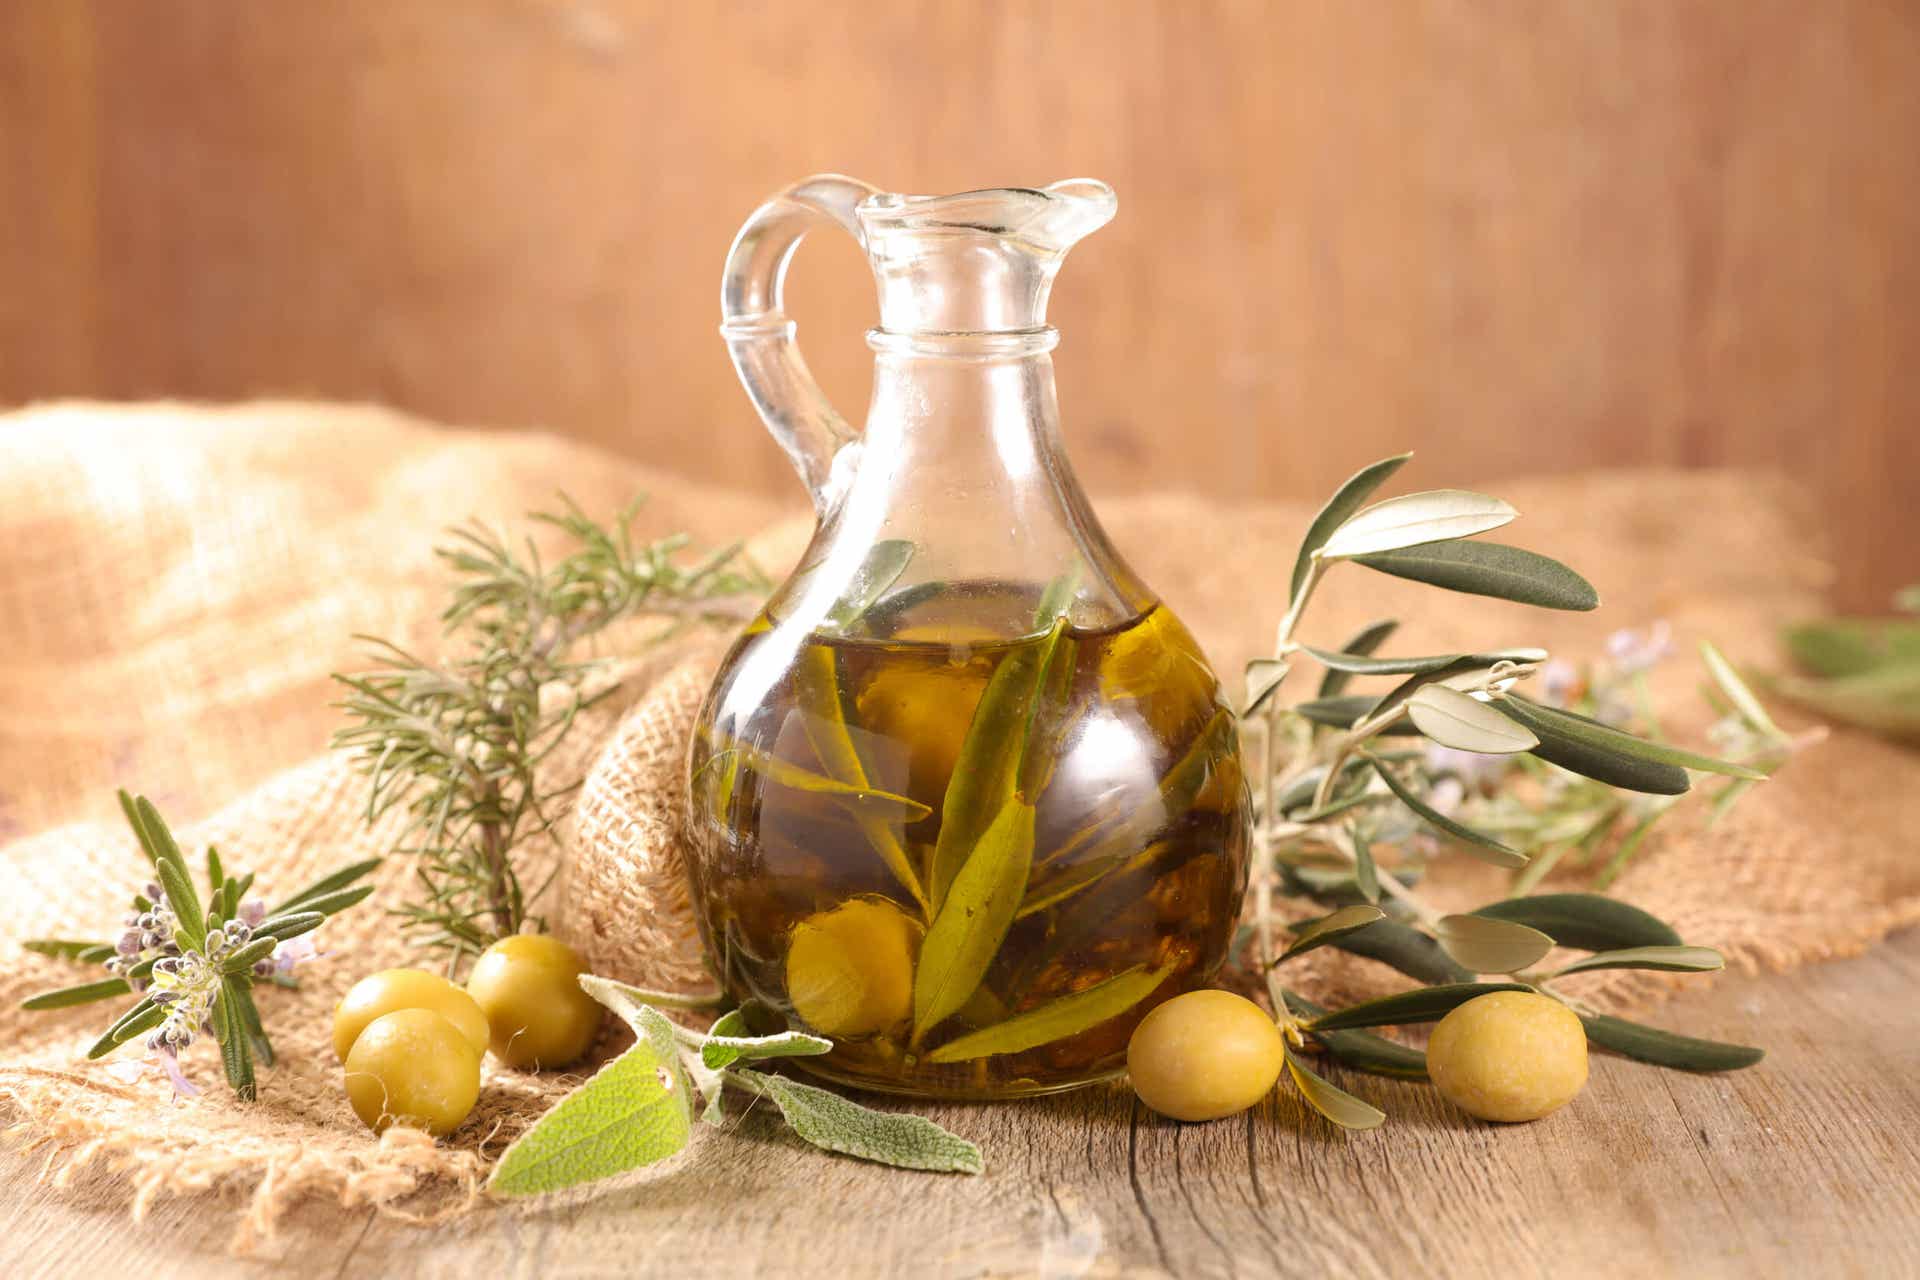 Raw or unfiltered olive oil: uses and recommendations